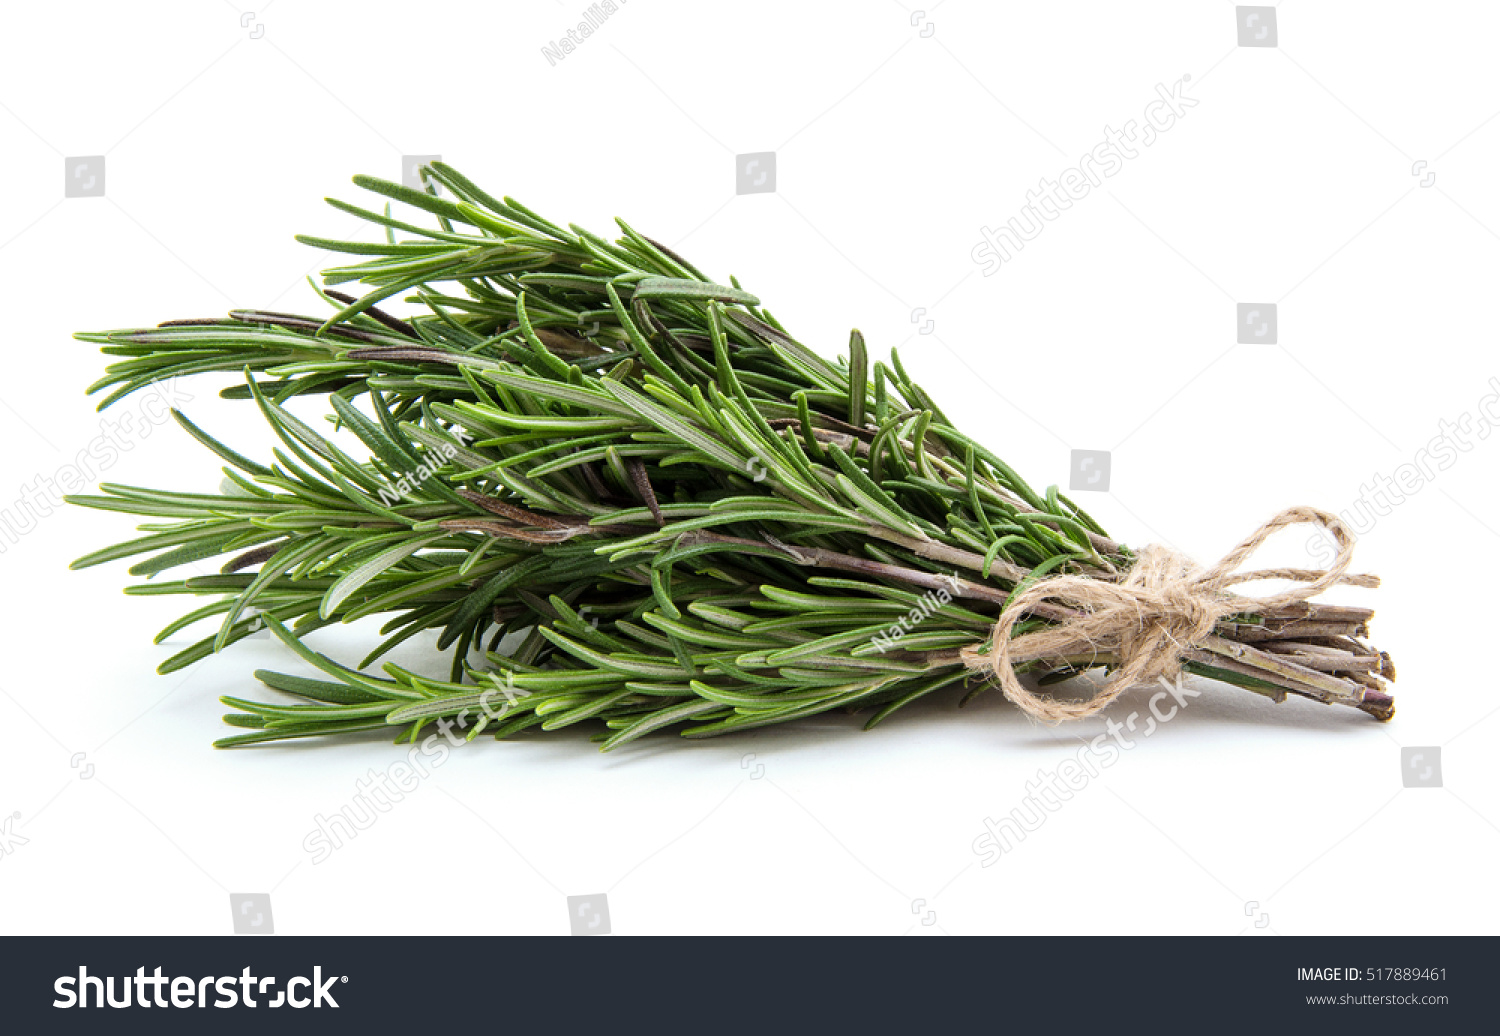 Rosemary bound on a white background #517889461